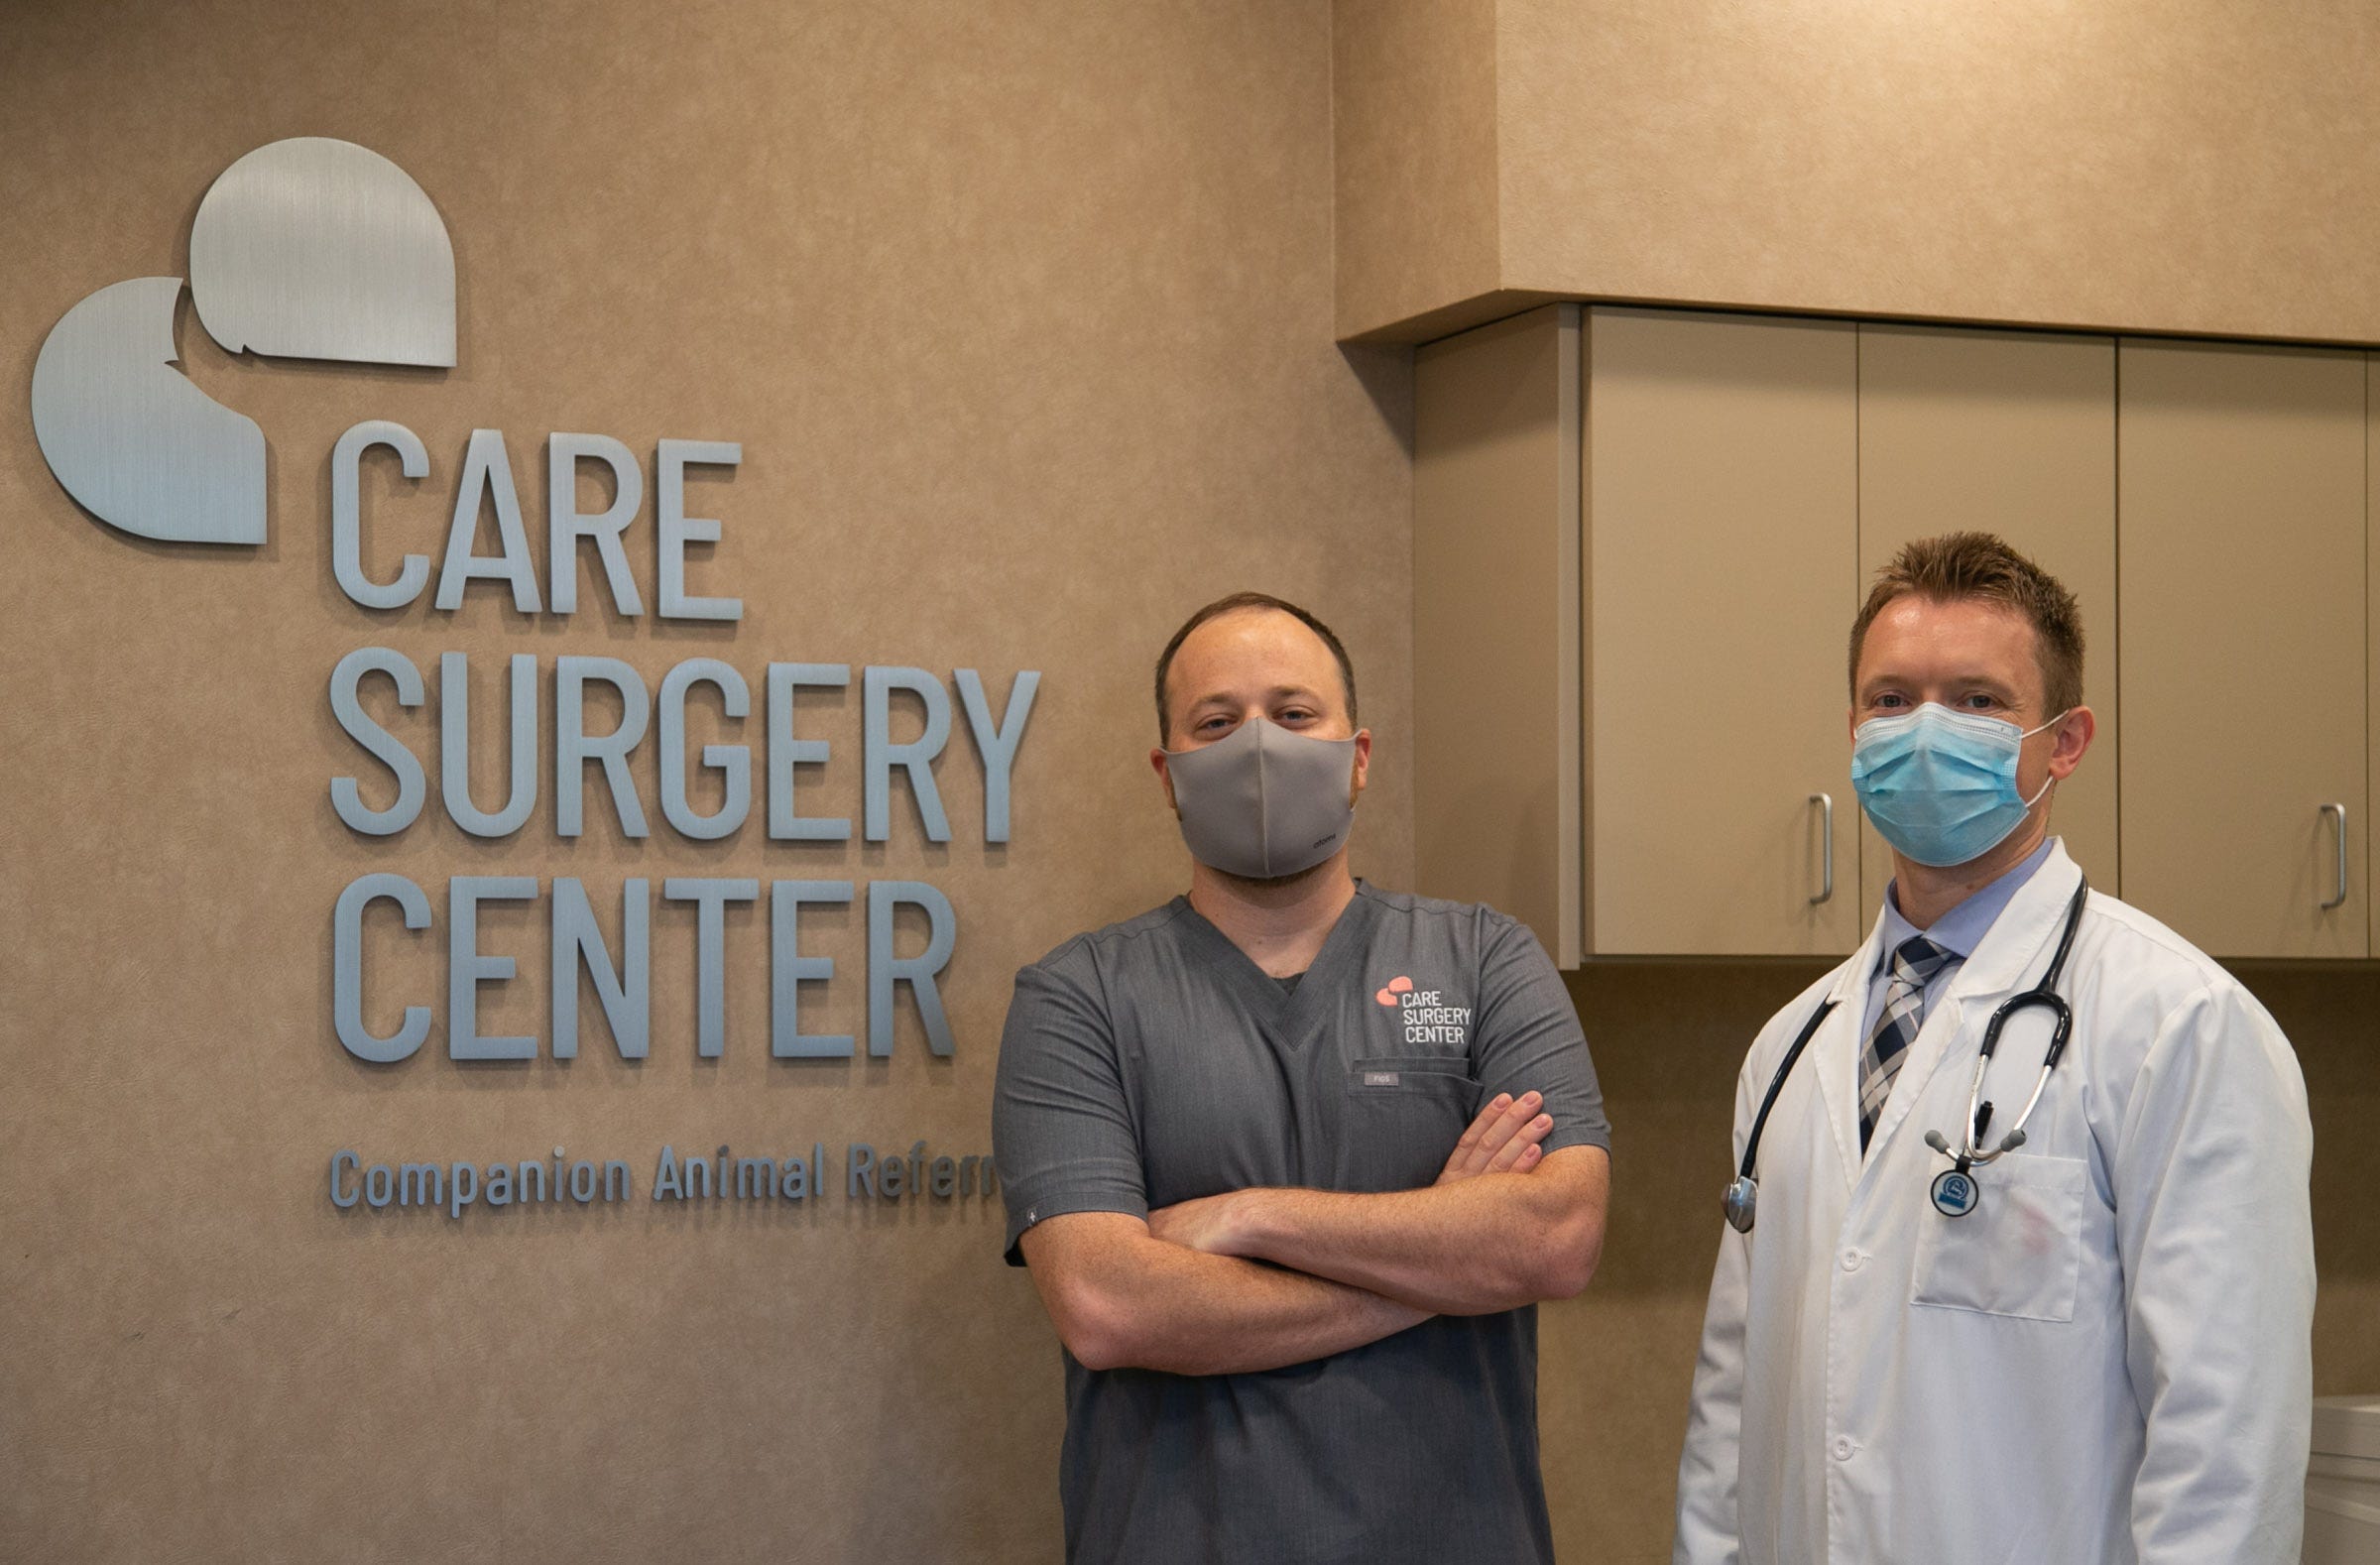 CARE Animal Surgery Center in Glendale does minimally invasive procedures